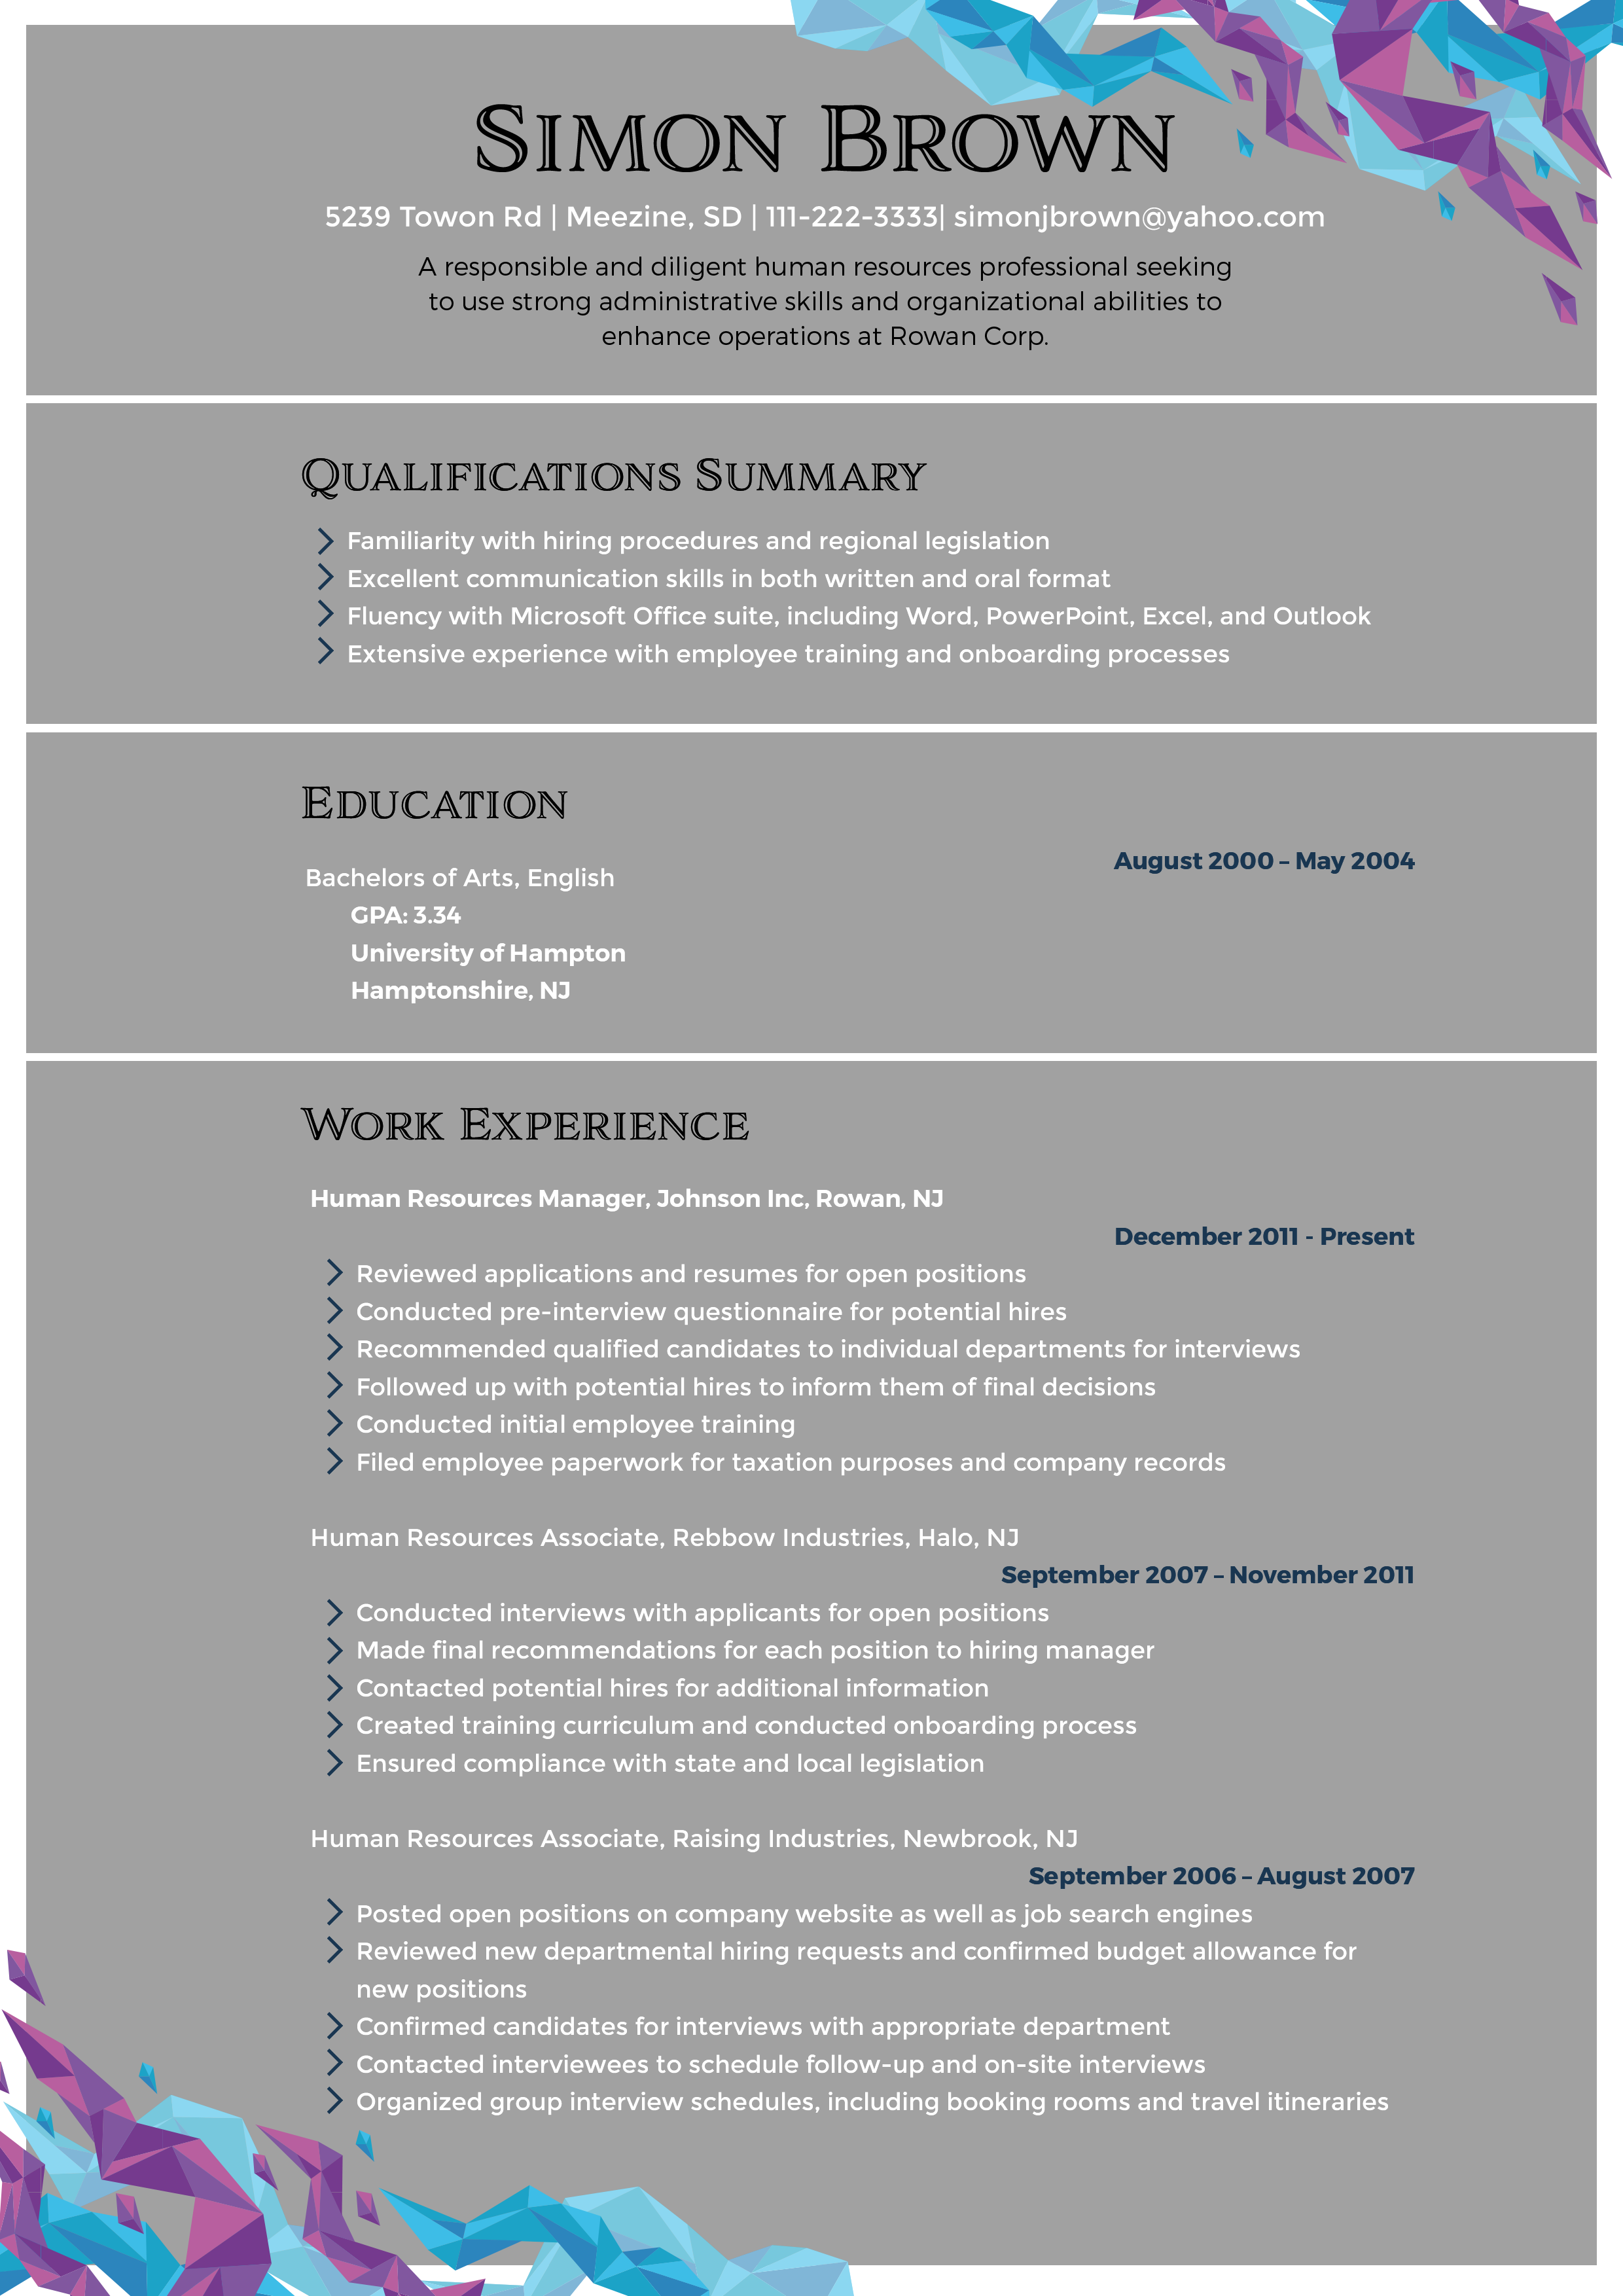 Human Resources Manager Resume That Will Get You Noticed